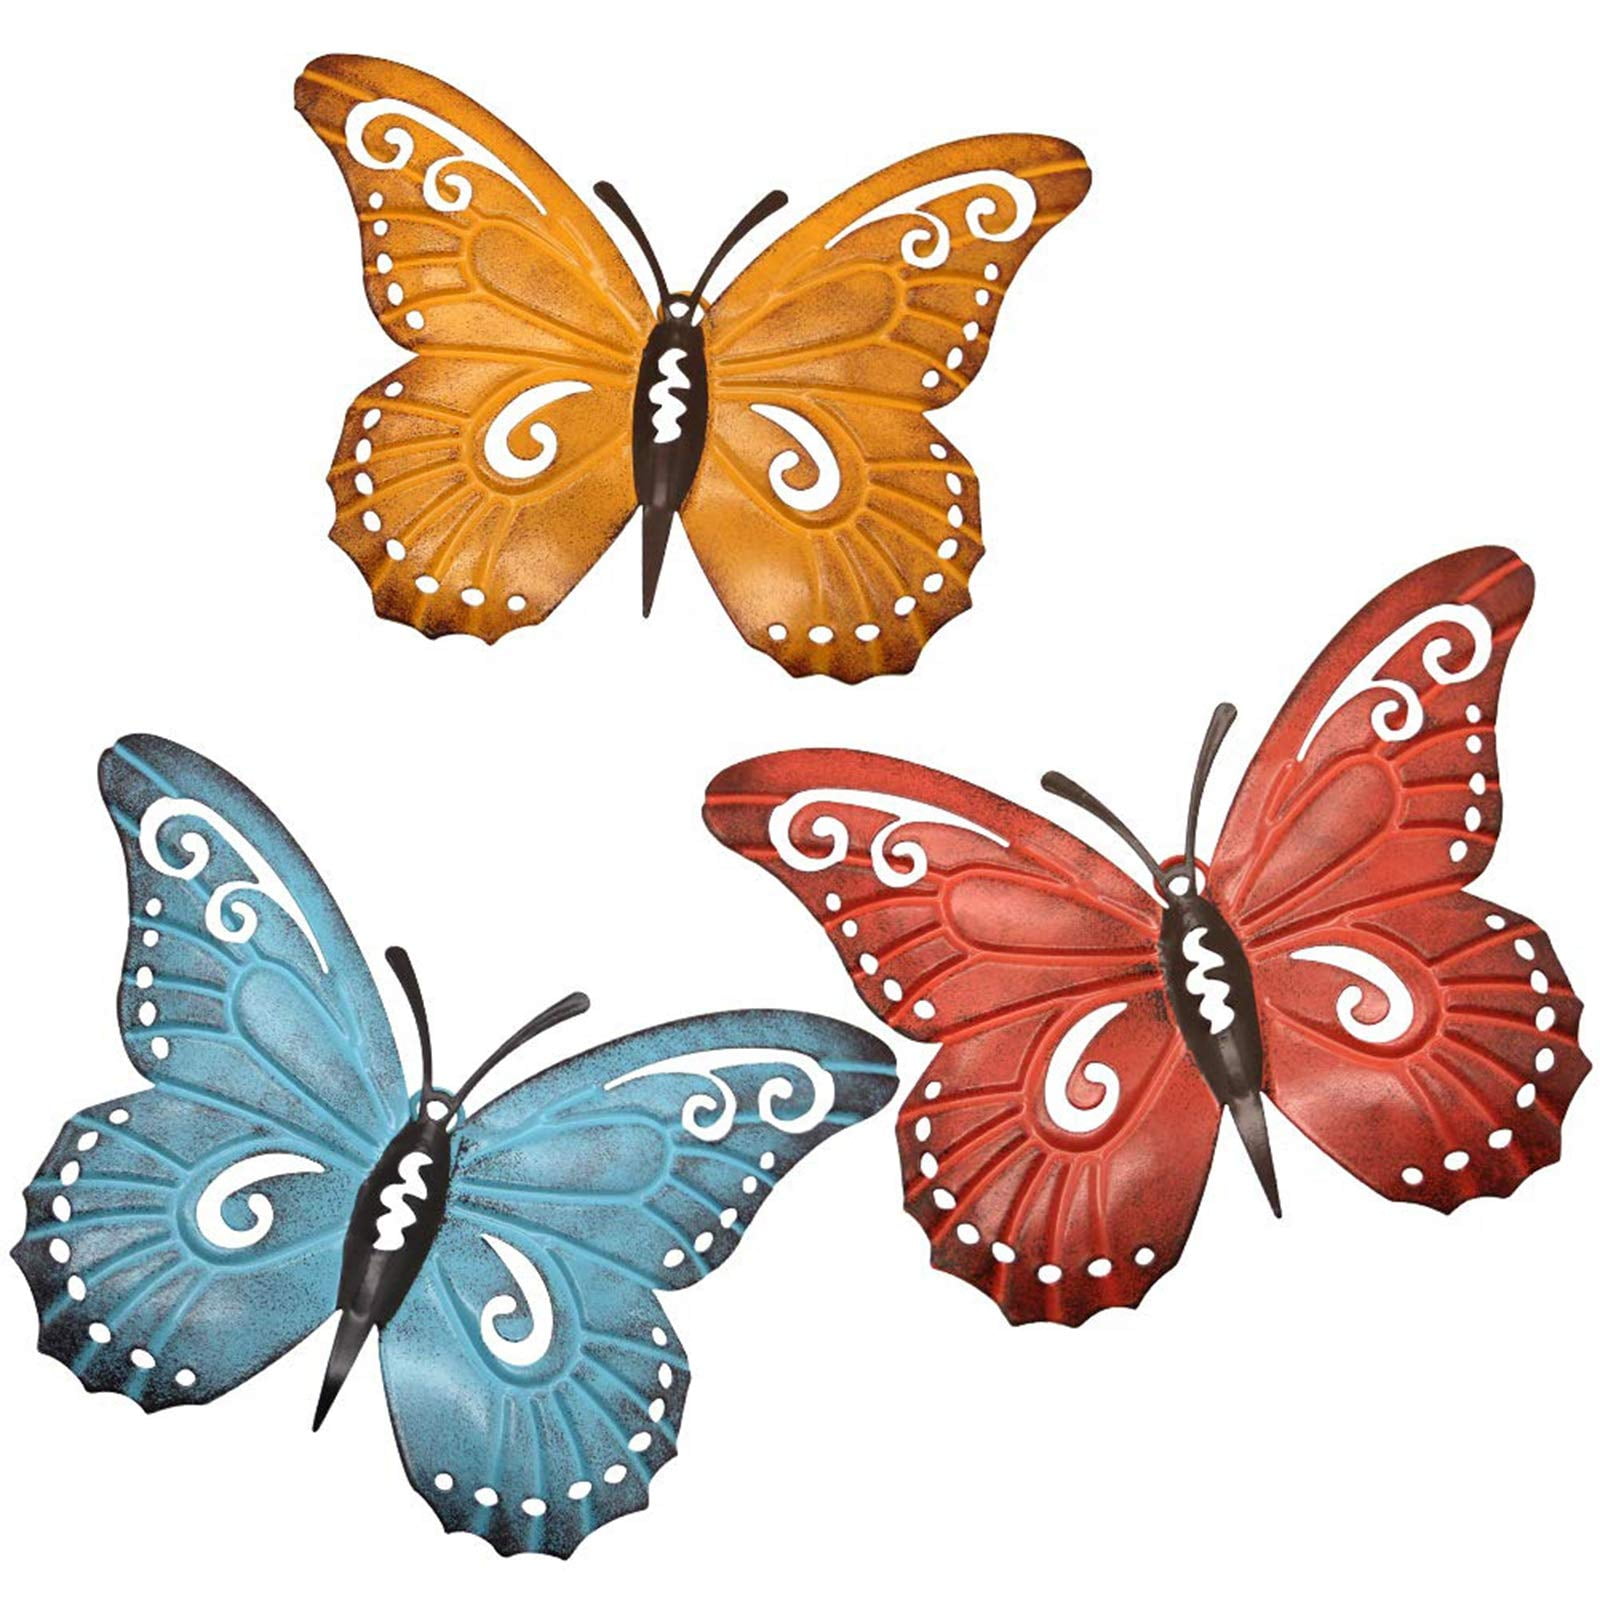 Metal Butterfly Decorative Wall Art,Hang Outdoor or Indoors 